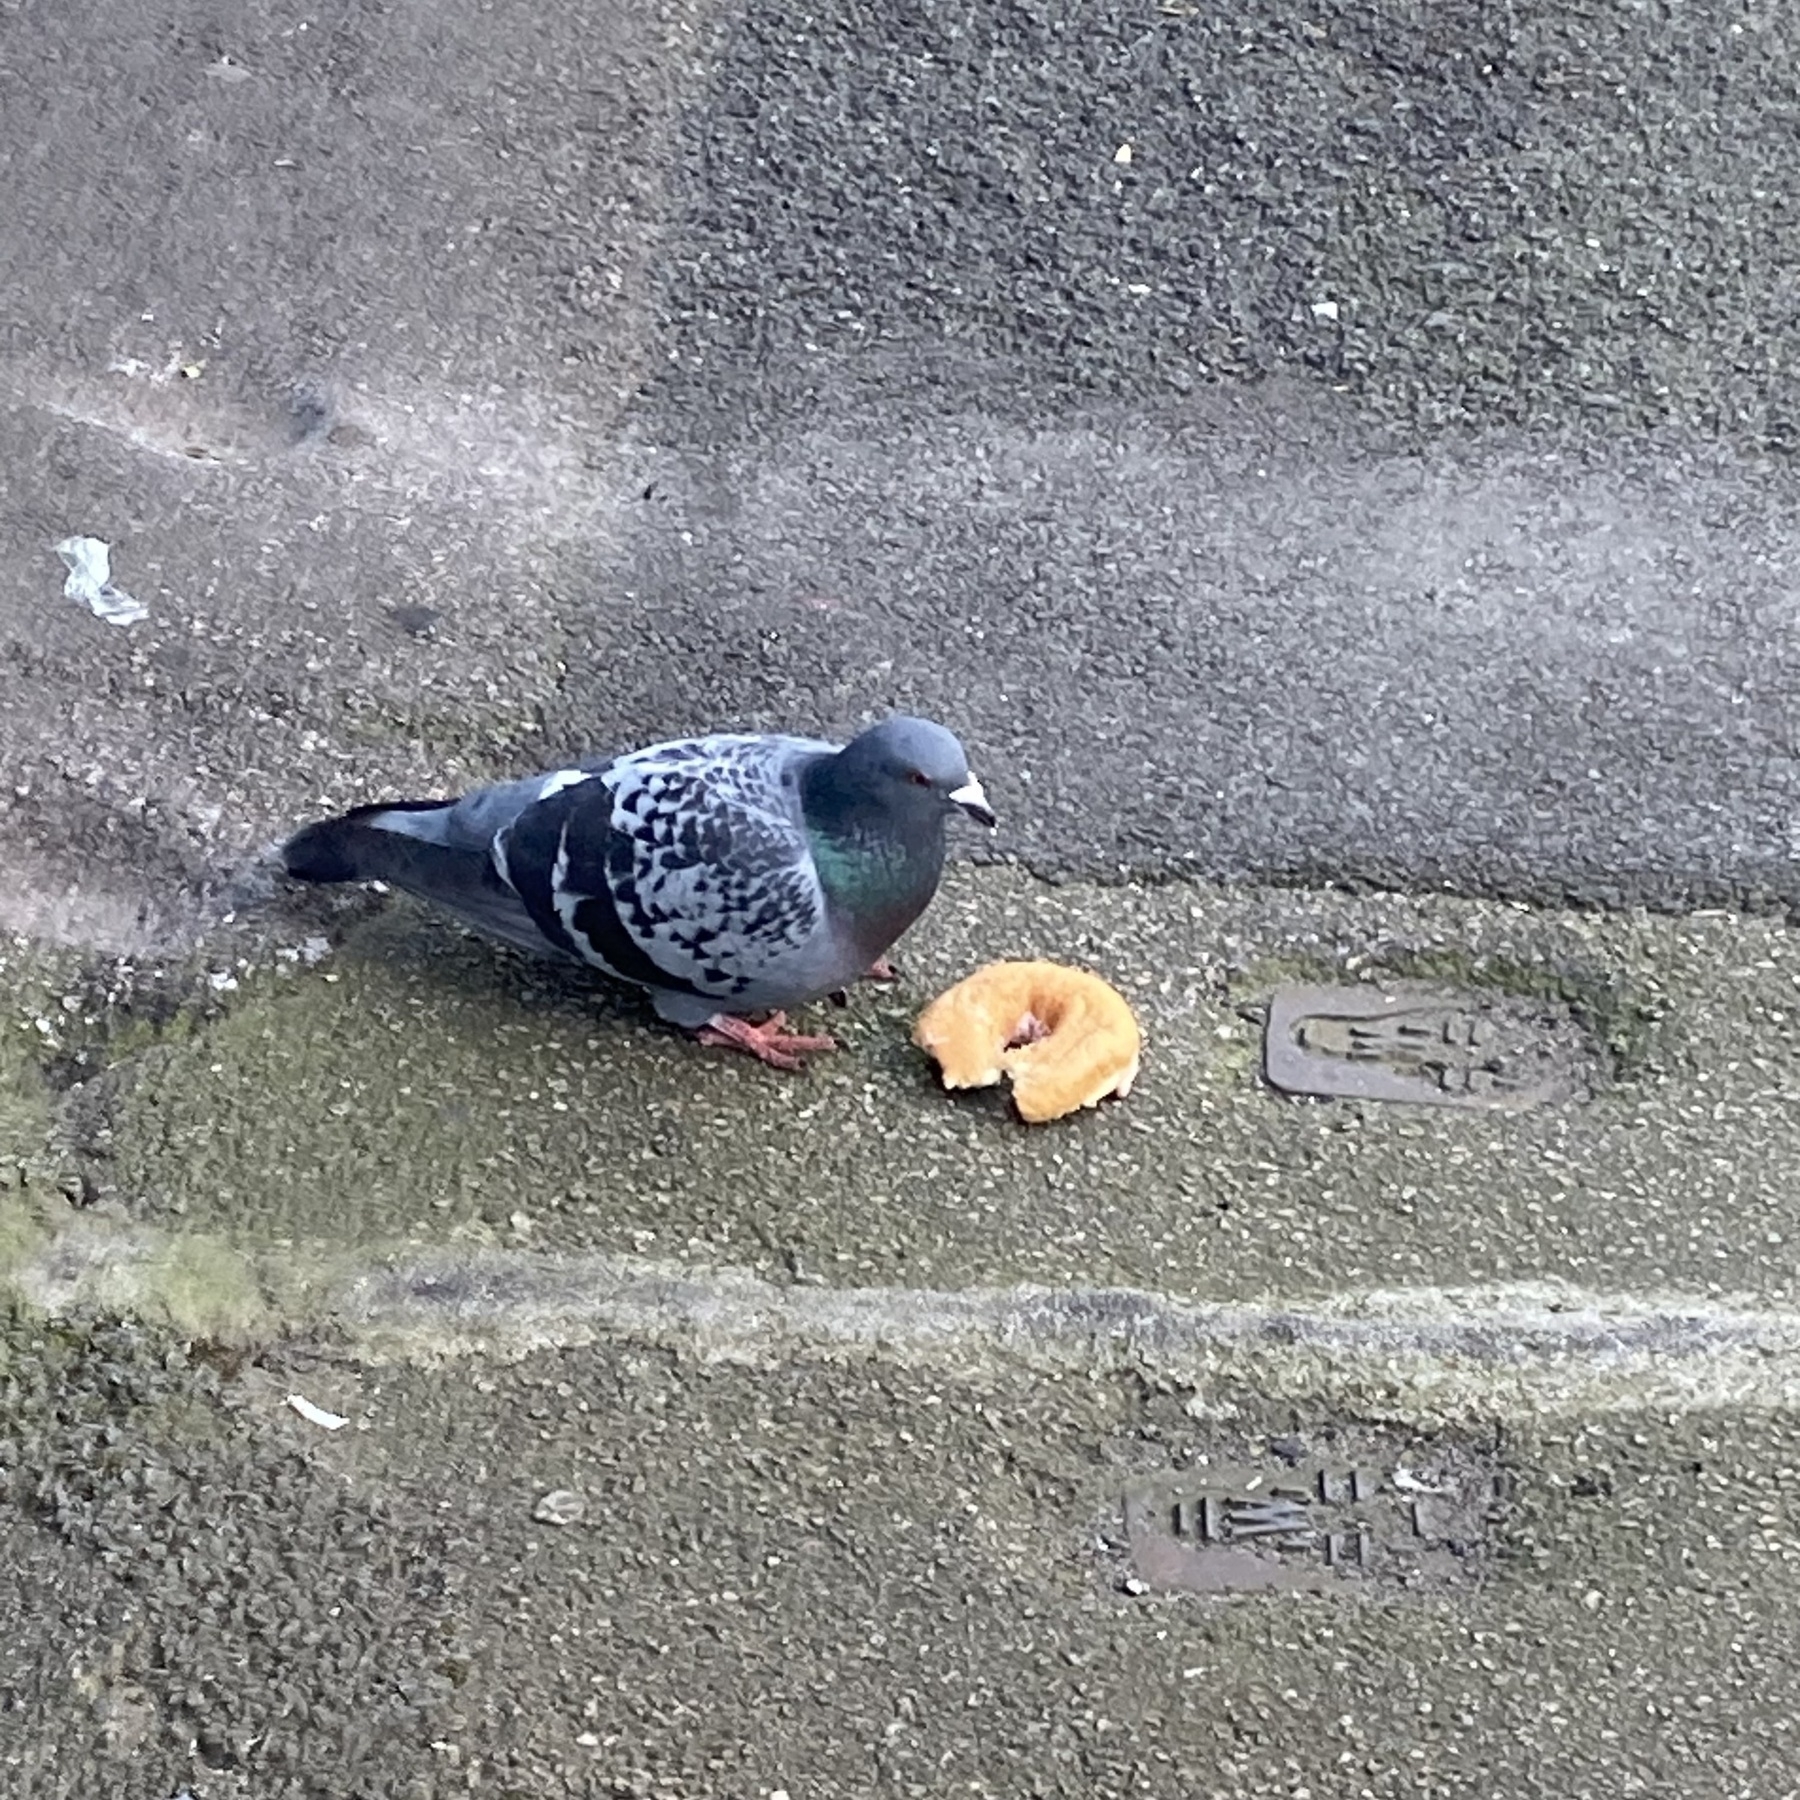 A classically-coloured London pigeon watches over a partially eaten donut against the backdrop of a tarmac pavement showing significant technical debt